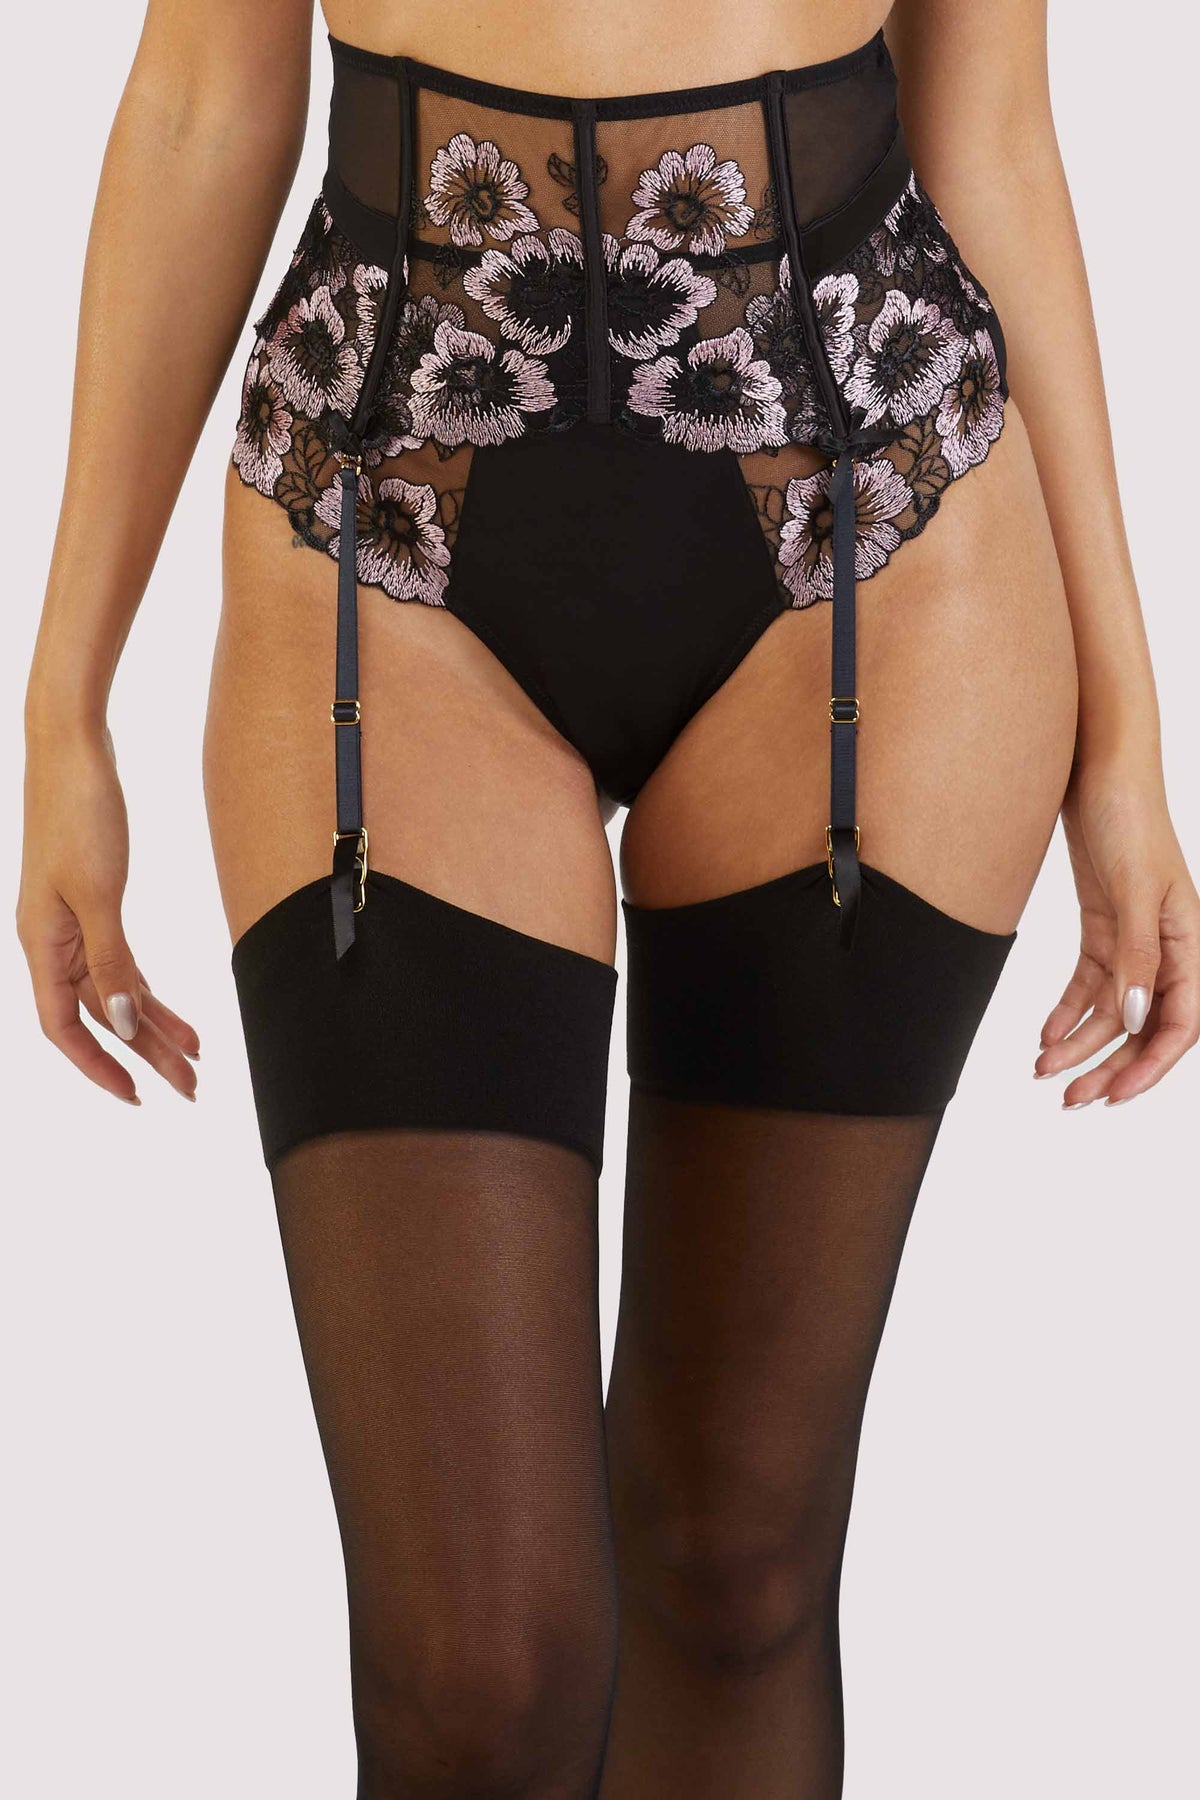 Playful Promises Fallon Black Basque at The Hosiery Box Basques and  Suspenders